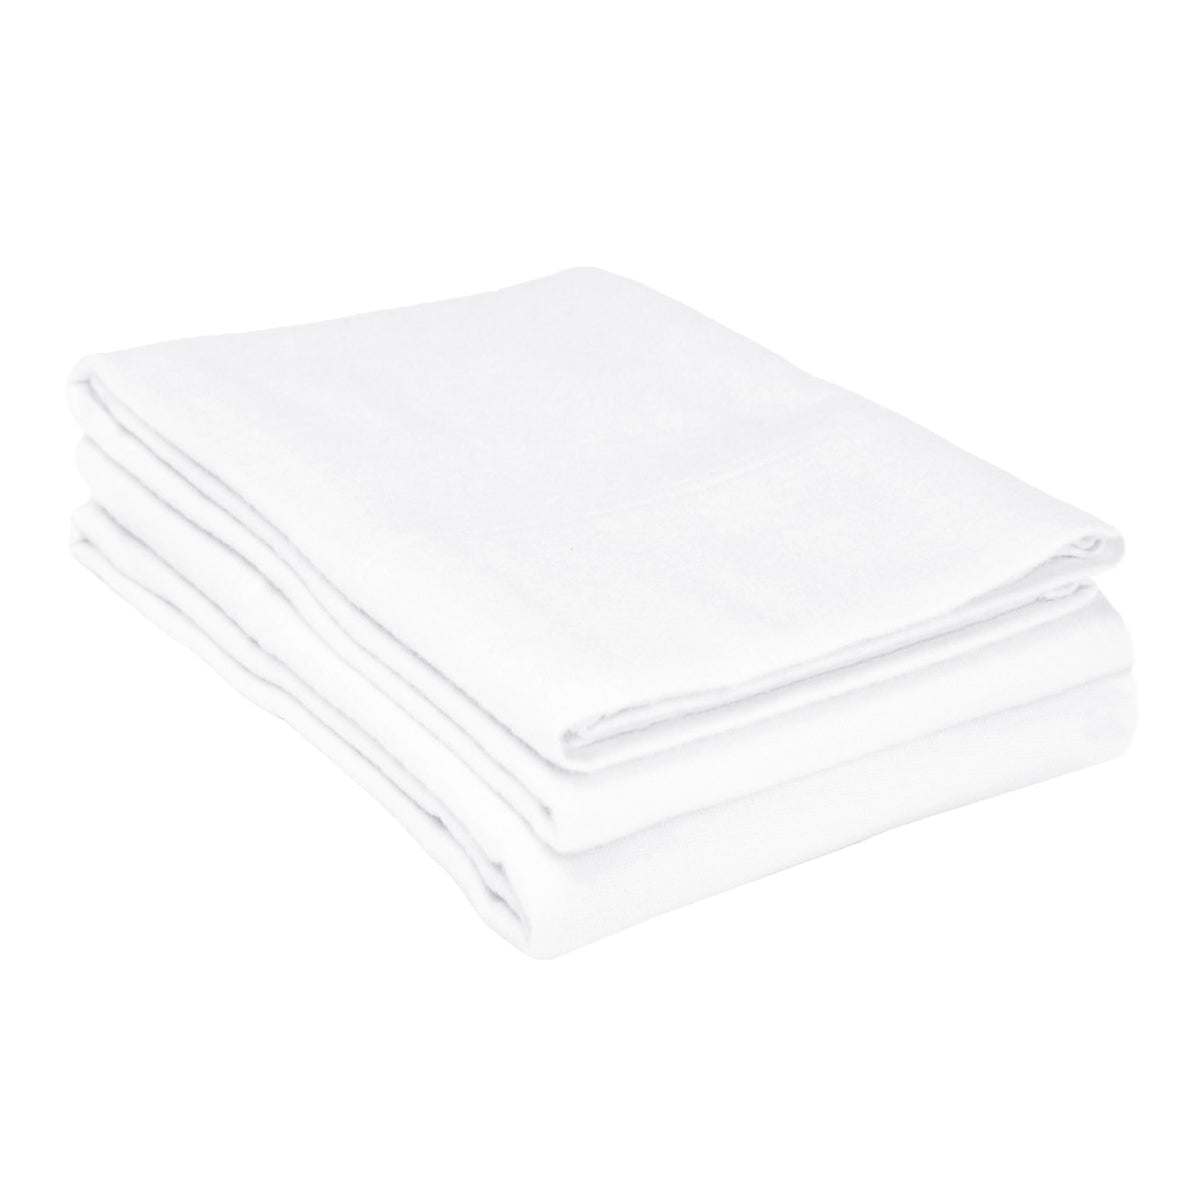 Solid Flannel Cotton Soft Fuzzy Pillowcases, Set of 2 - White